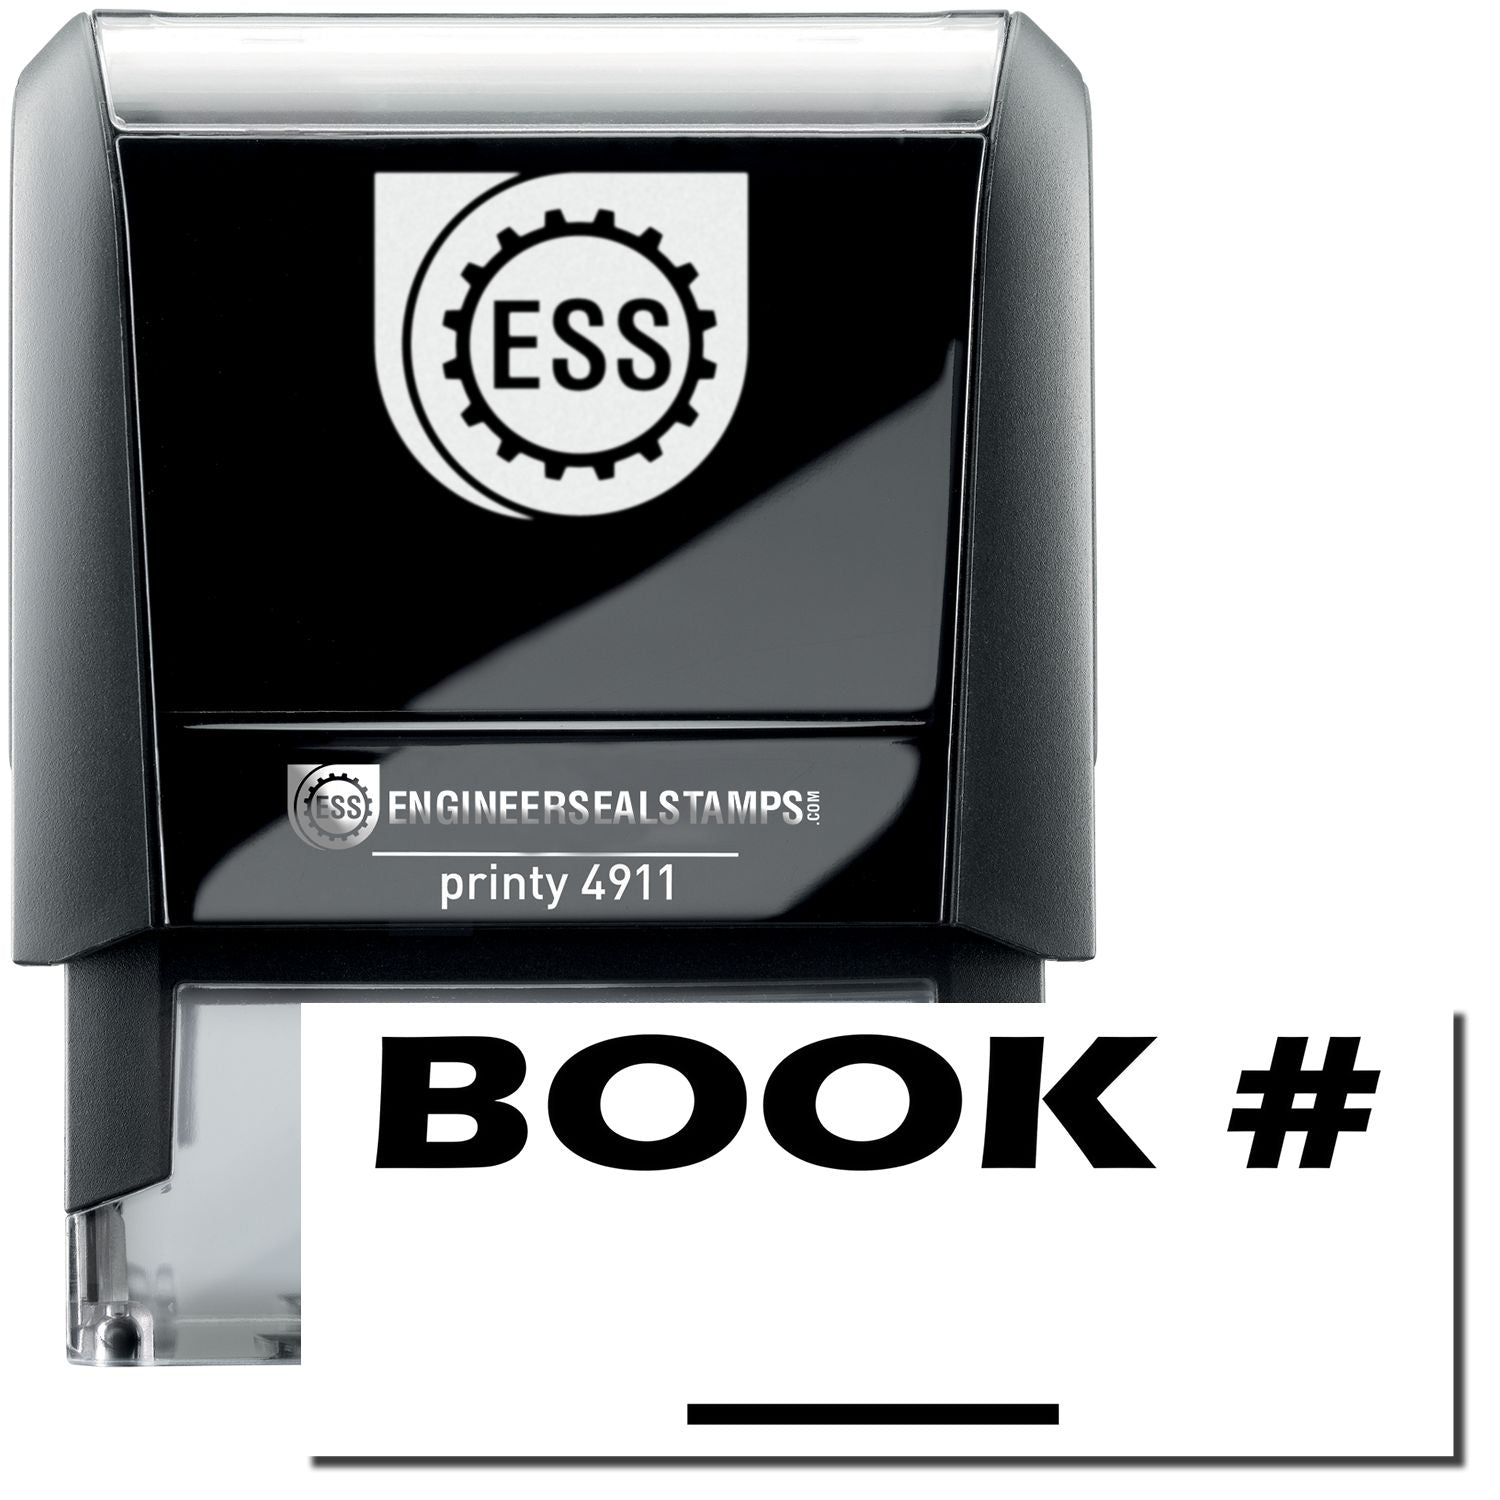 A self-inking stamp with a stamped image showing how the text "BOOK #" with a line under it is displayed after stamping.